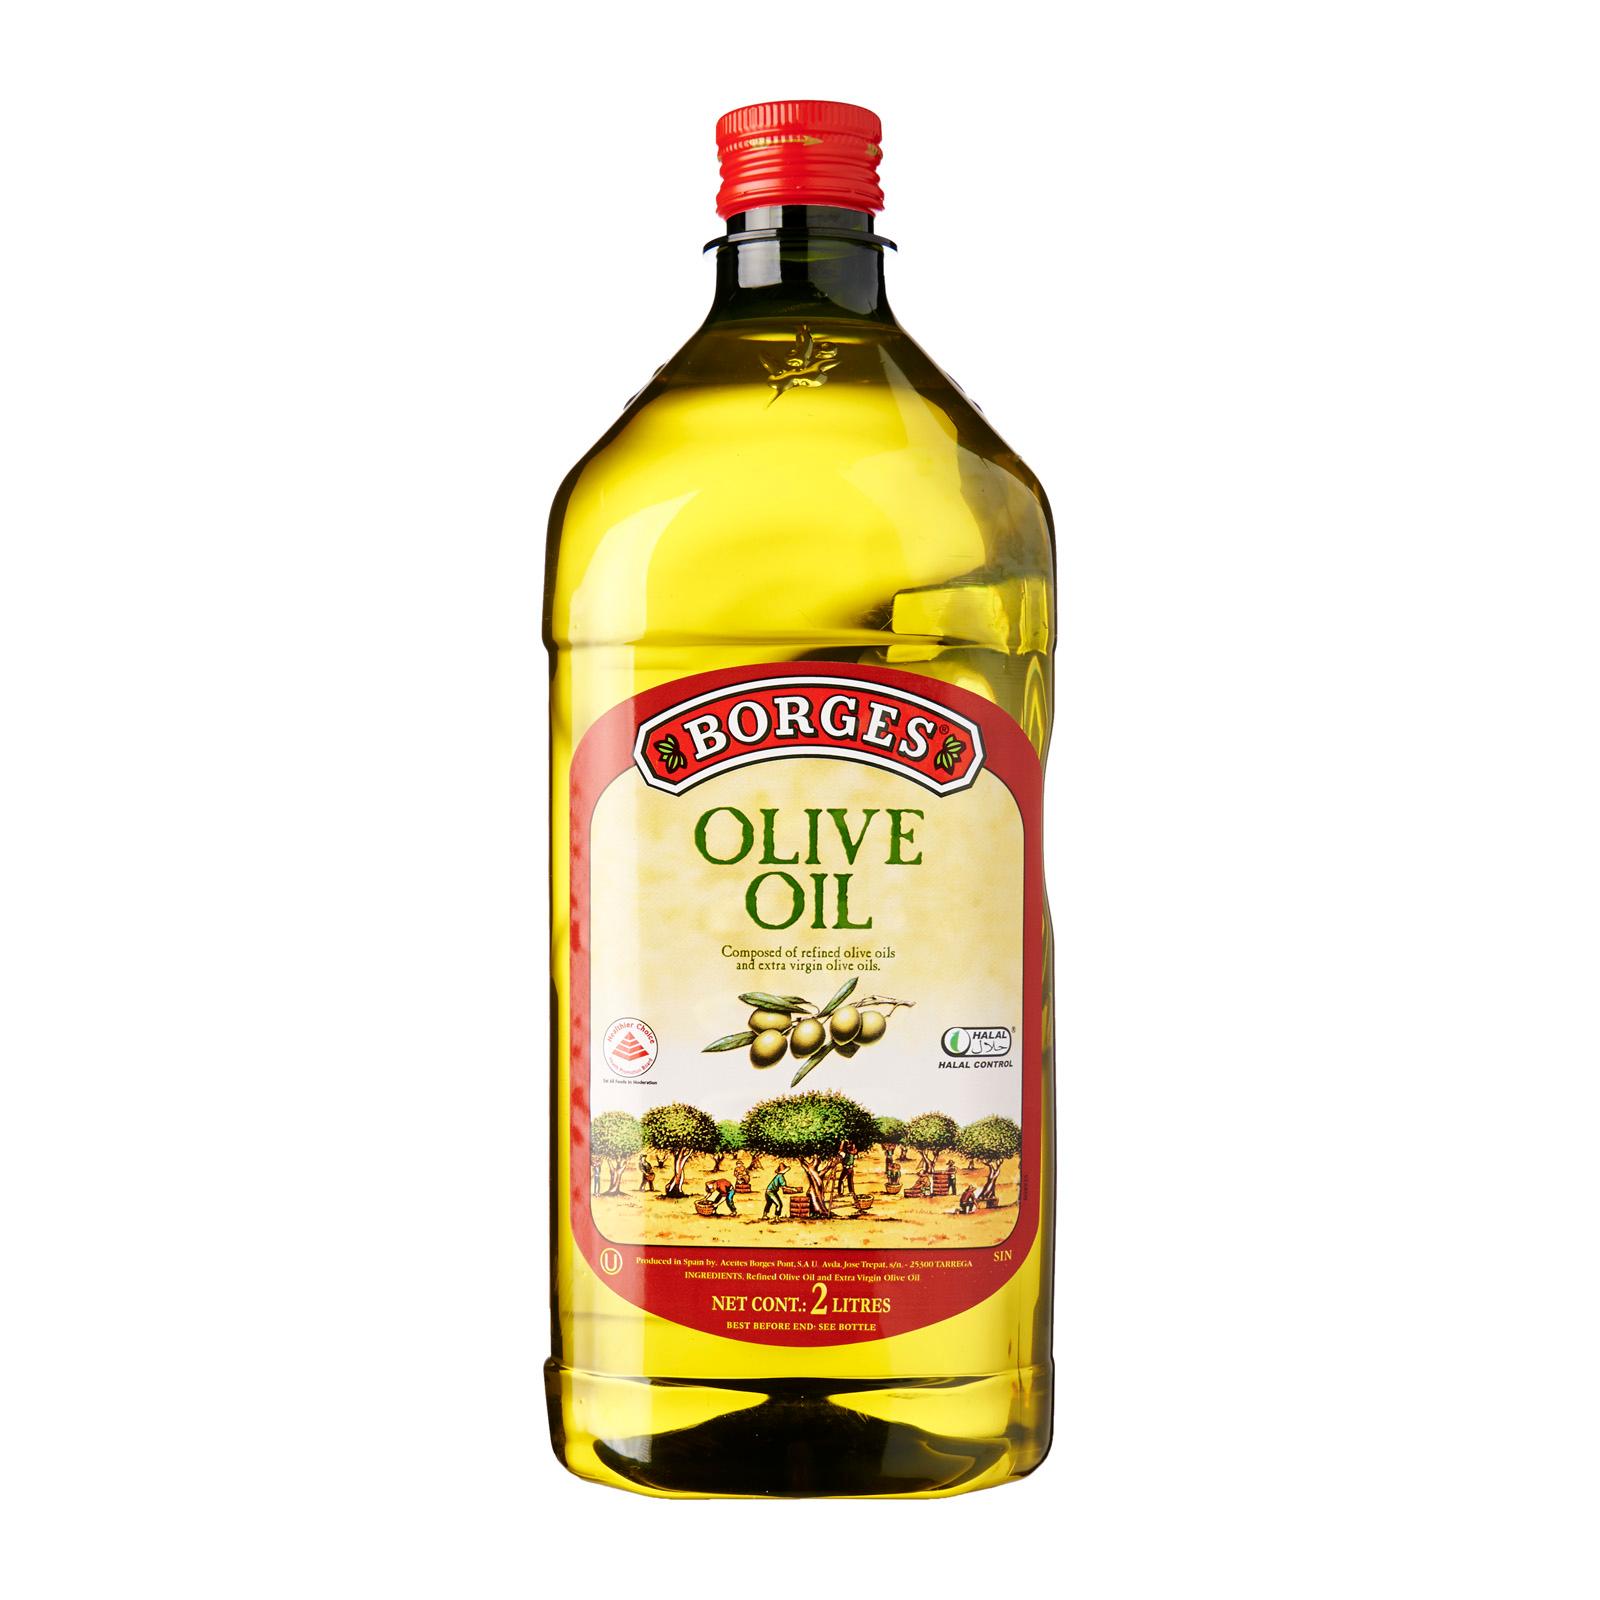 Borges Olive Oil 0 - from RedMart